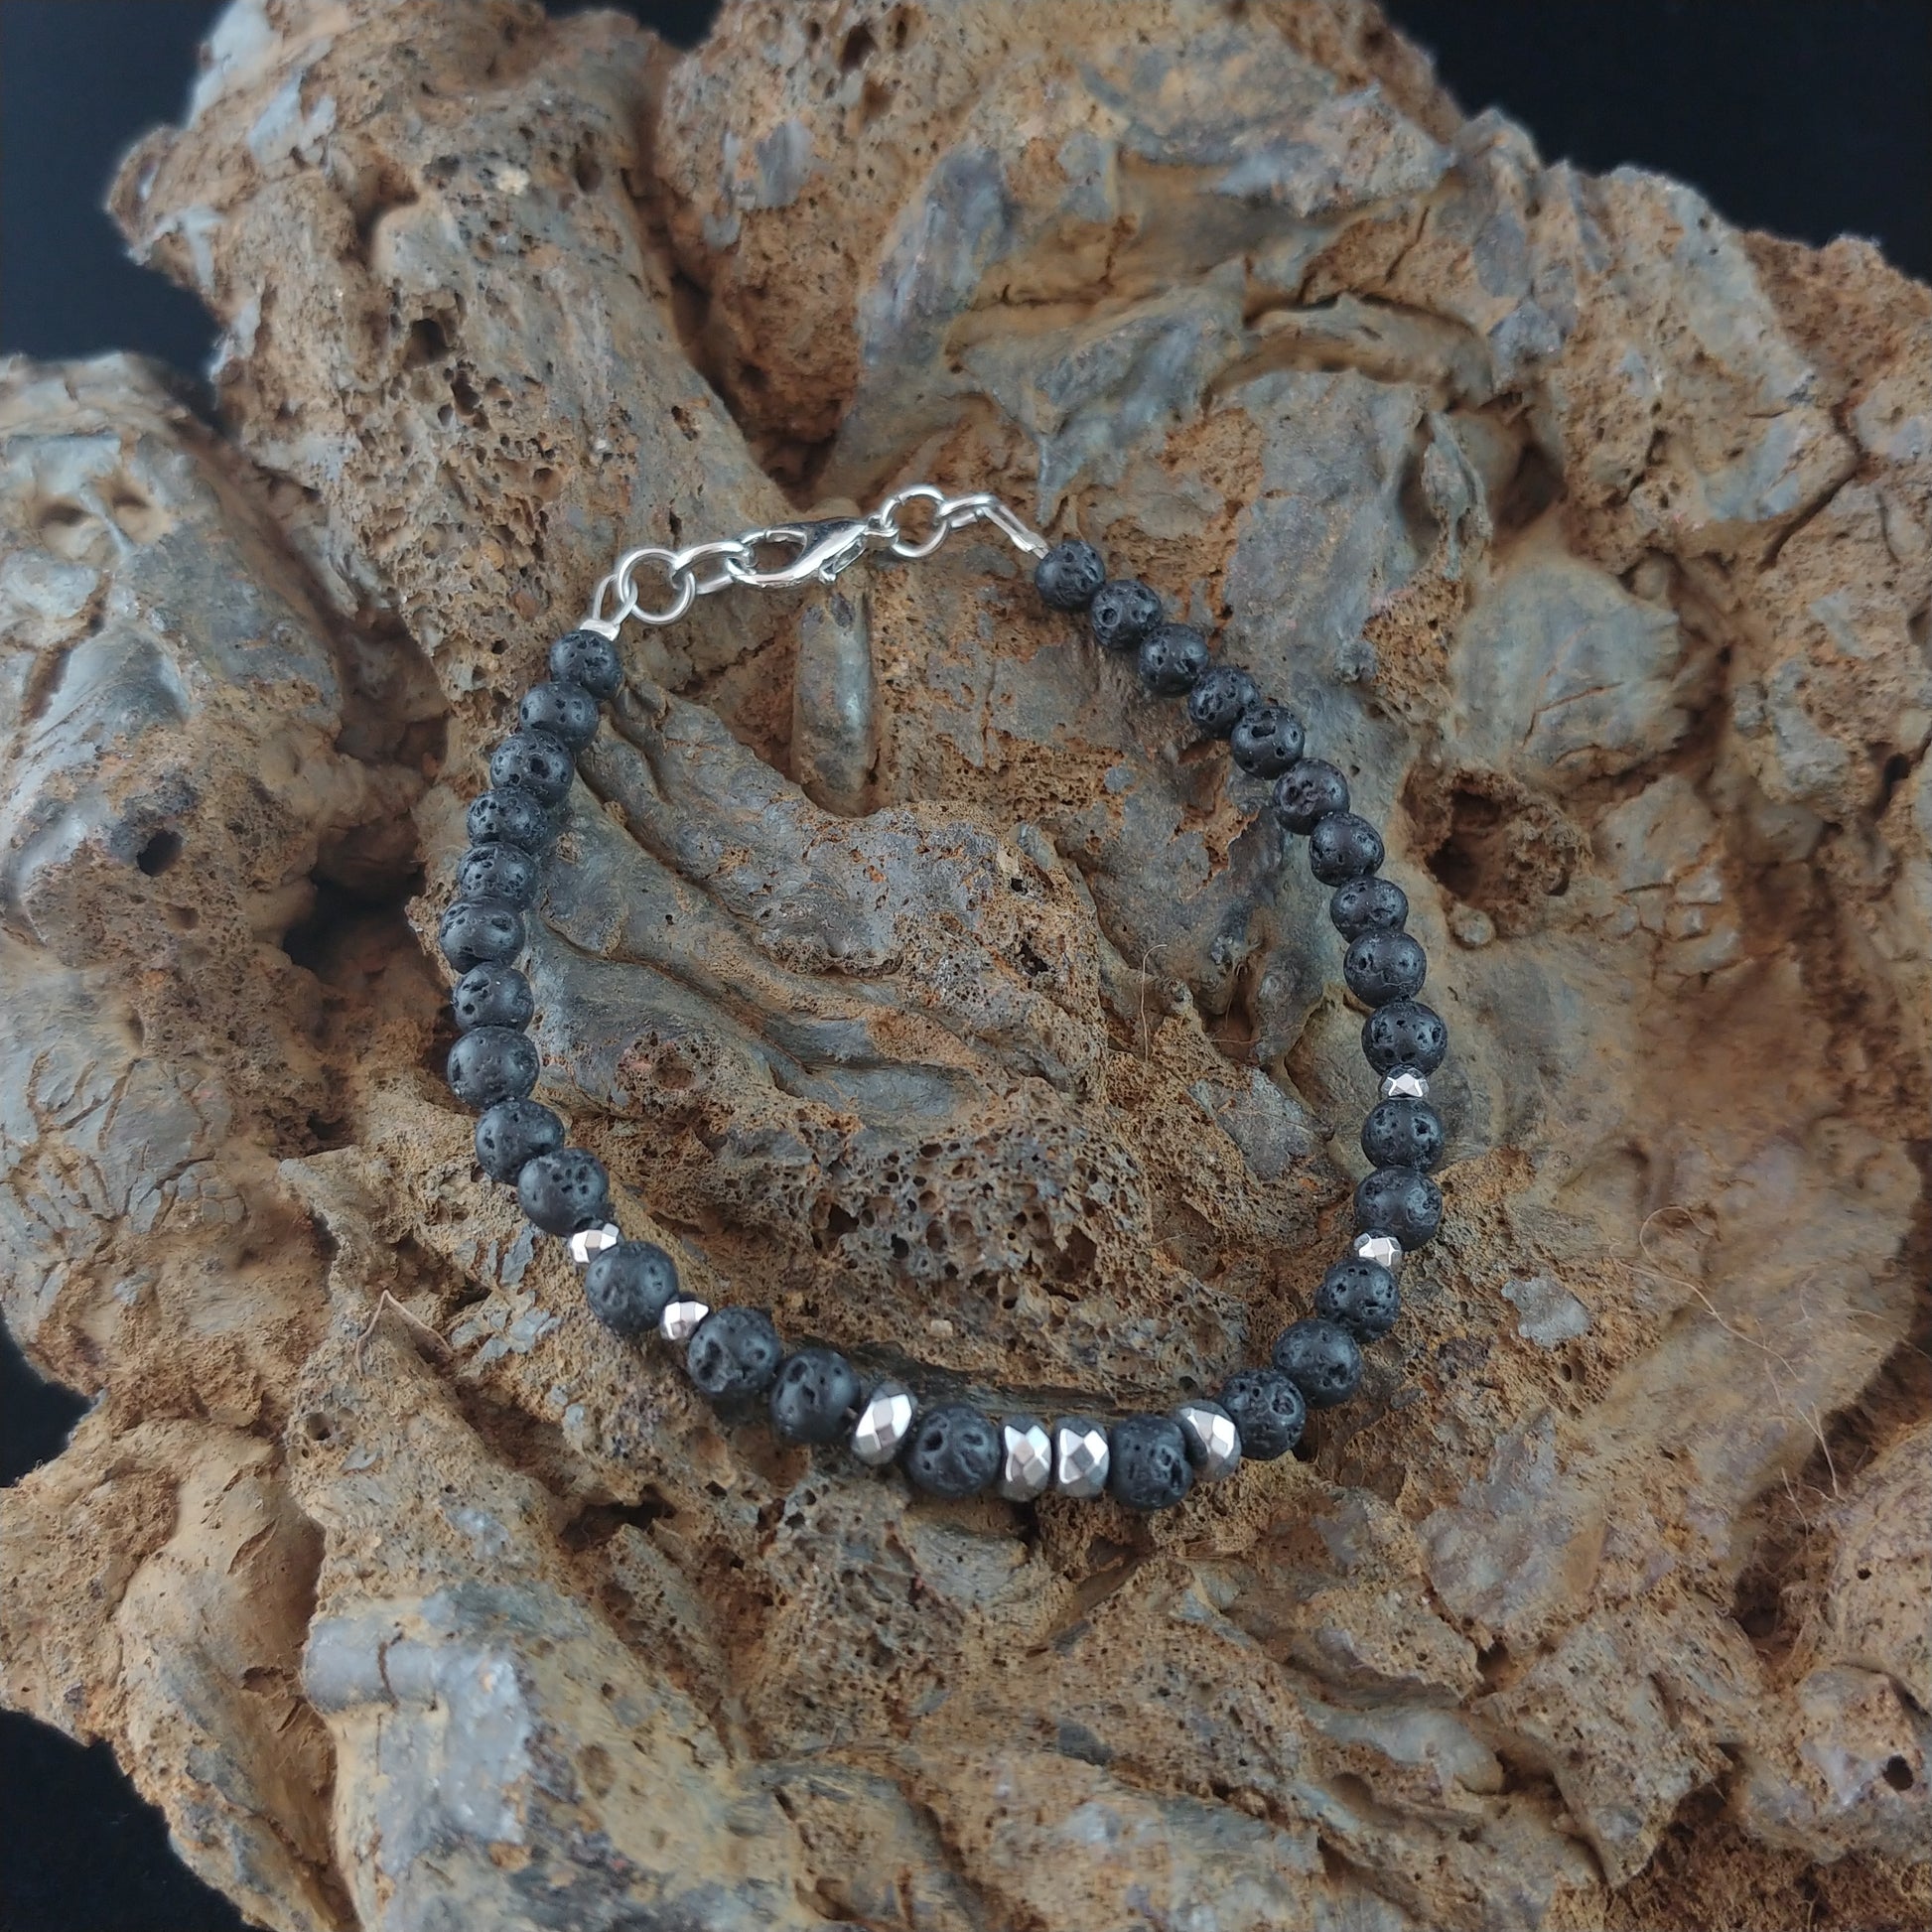 Lava beads bracelet with small 4mm lava beads. The bracelet has a chain and lobster claw clasp. The bracelets sits on a dark magma rock display